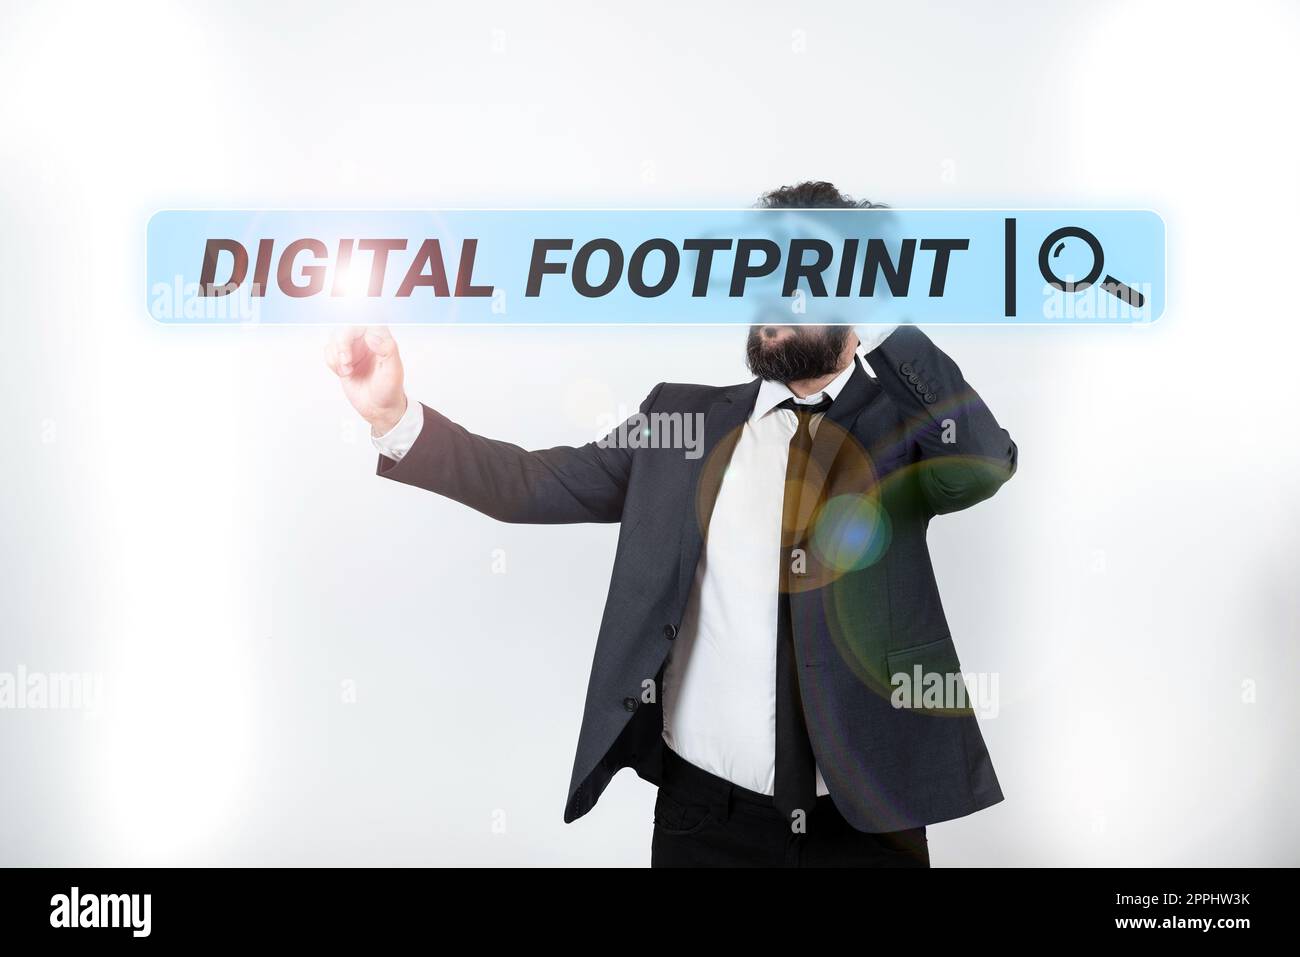 Sign displaying Digital Footprint. Business approach uses digital technology to operate the manufacturing process Stock Photo